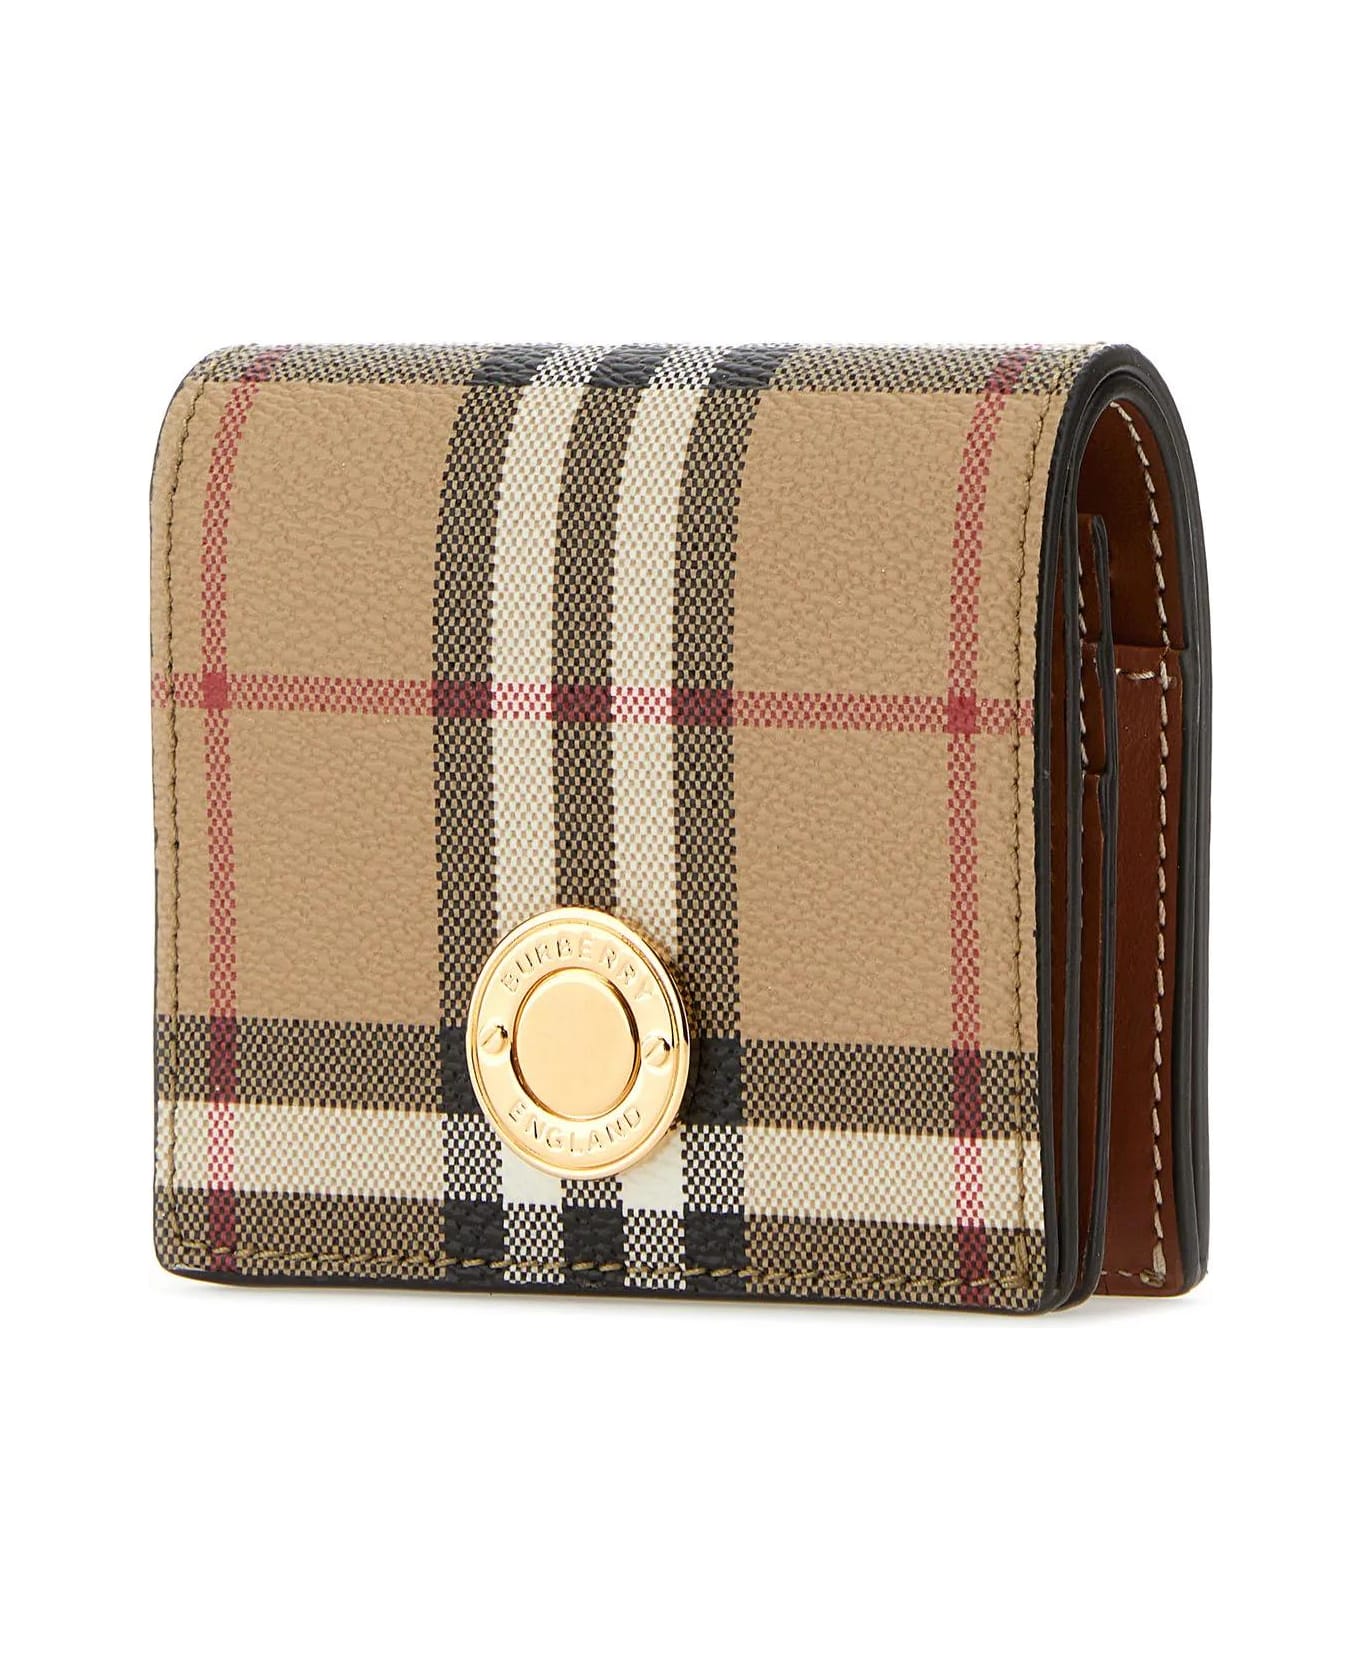 Burberry Printed Canvas Small Wallet - Beige 財布